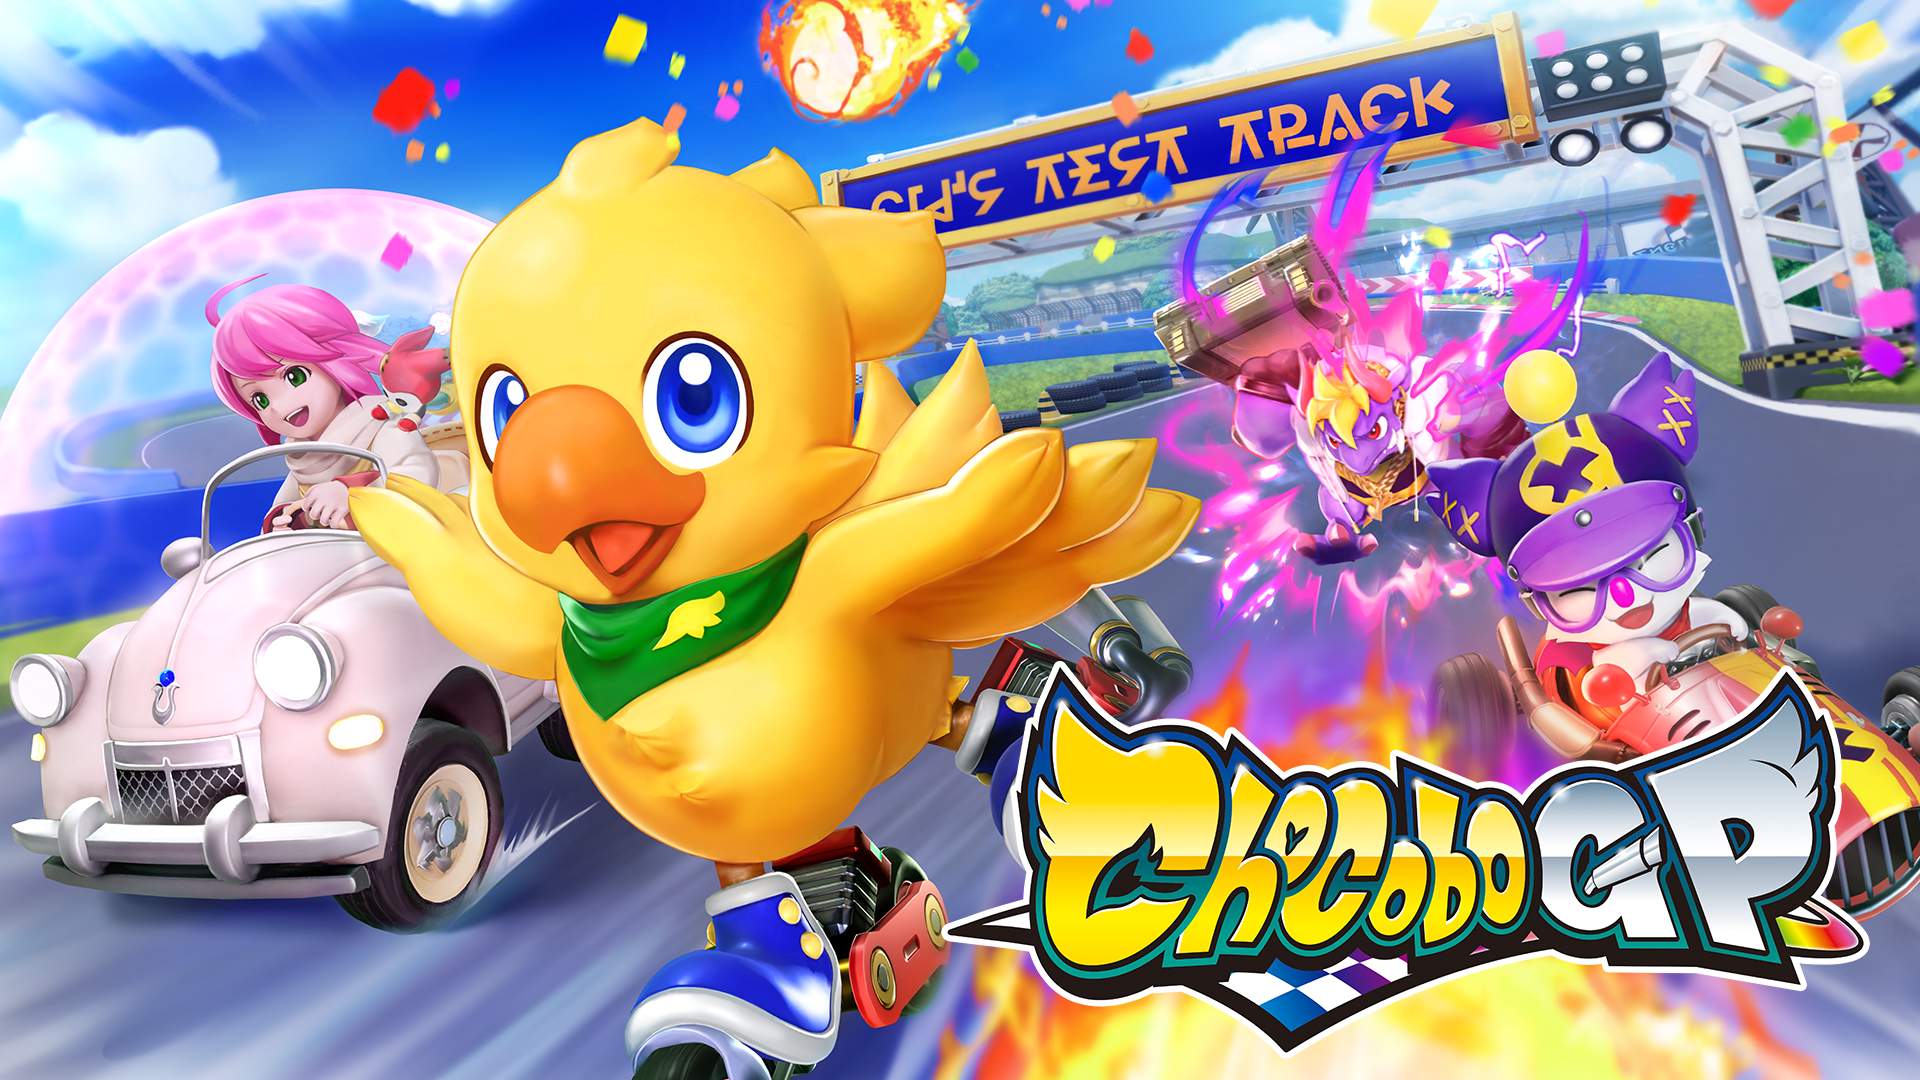 Chocobo on roller blades on race track